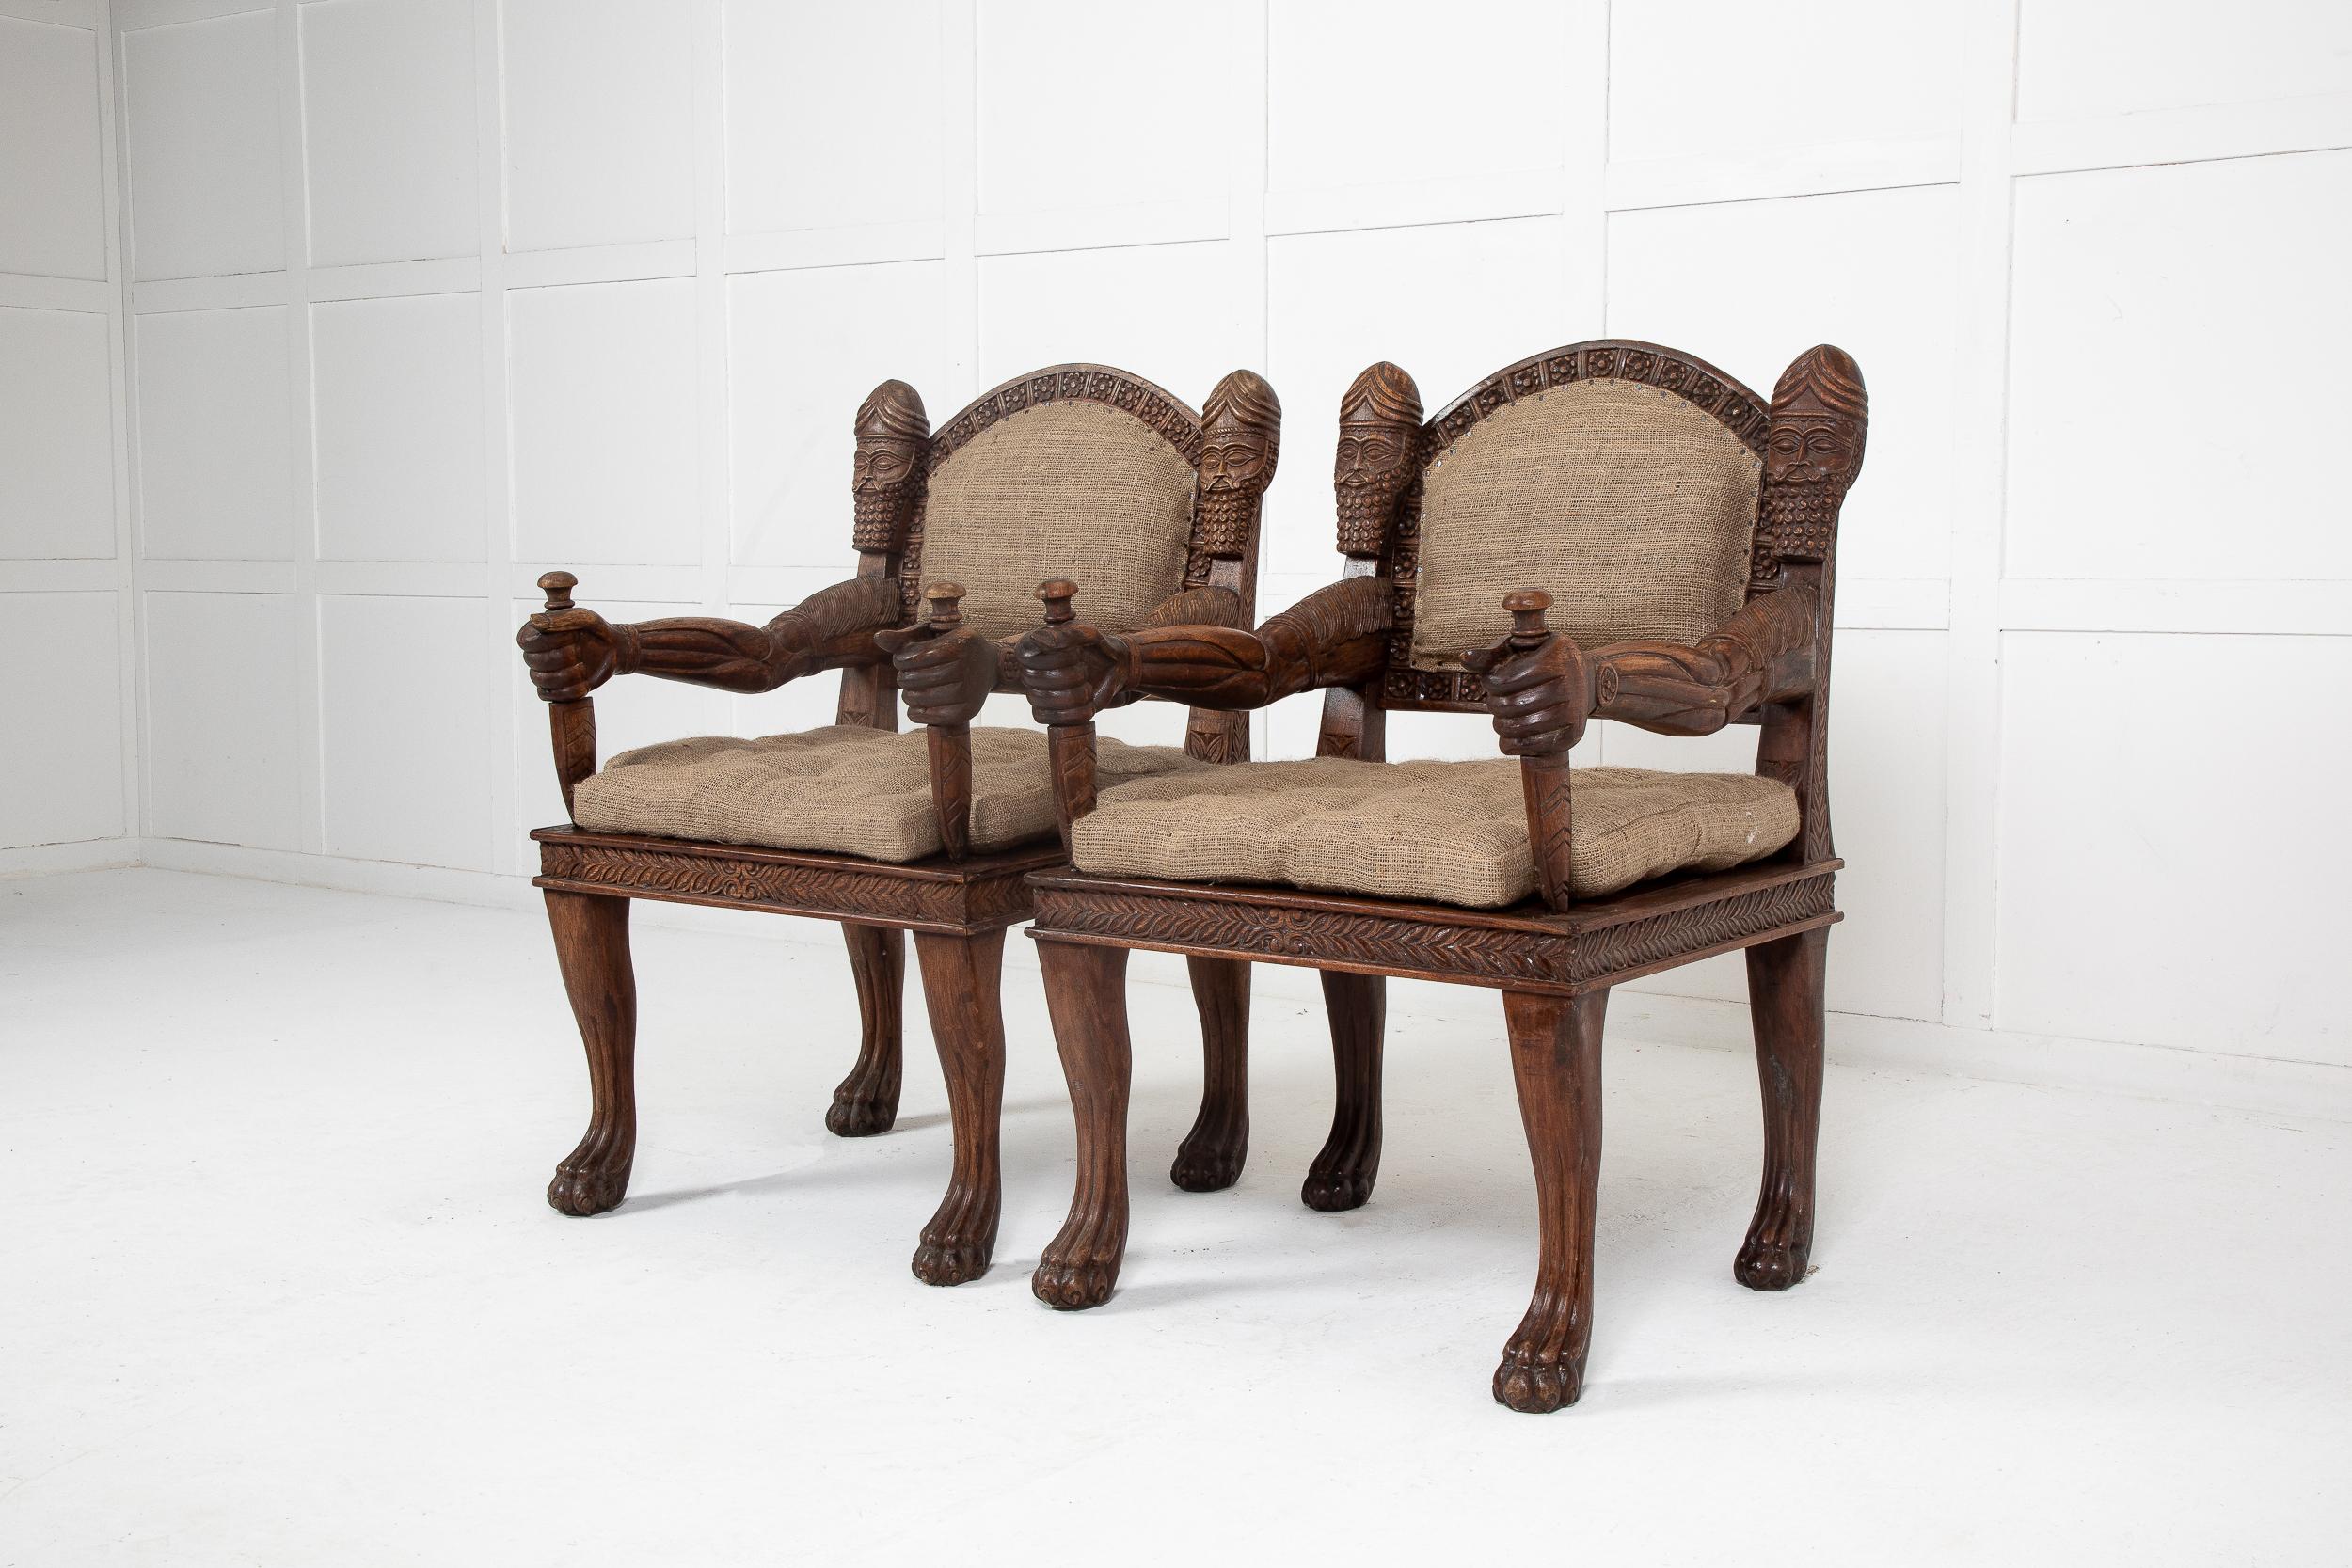 A pair of unique, late 20th century armchairs, possibly Asian. The large, sturdy and comfortable armchairs are very unusual, and carved with elaborate details which catch the eye and have plenty of character. The arms are of human form, gripping